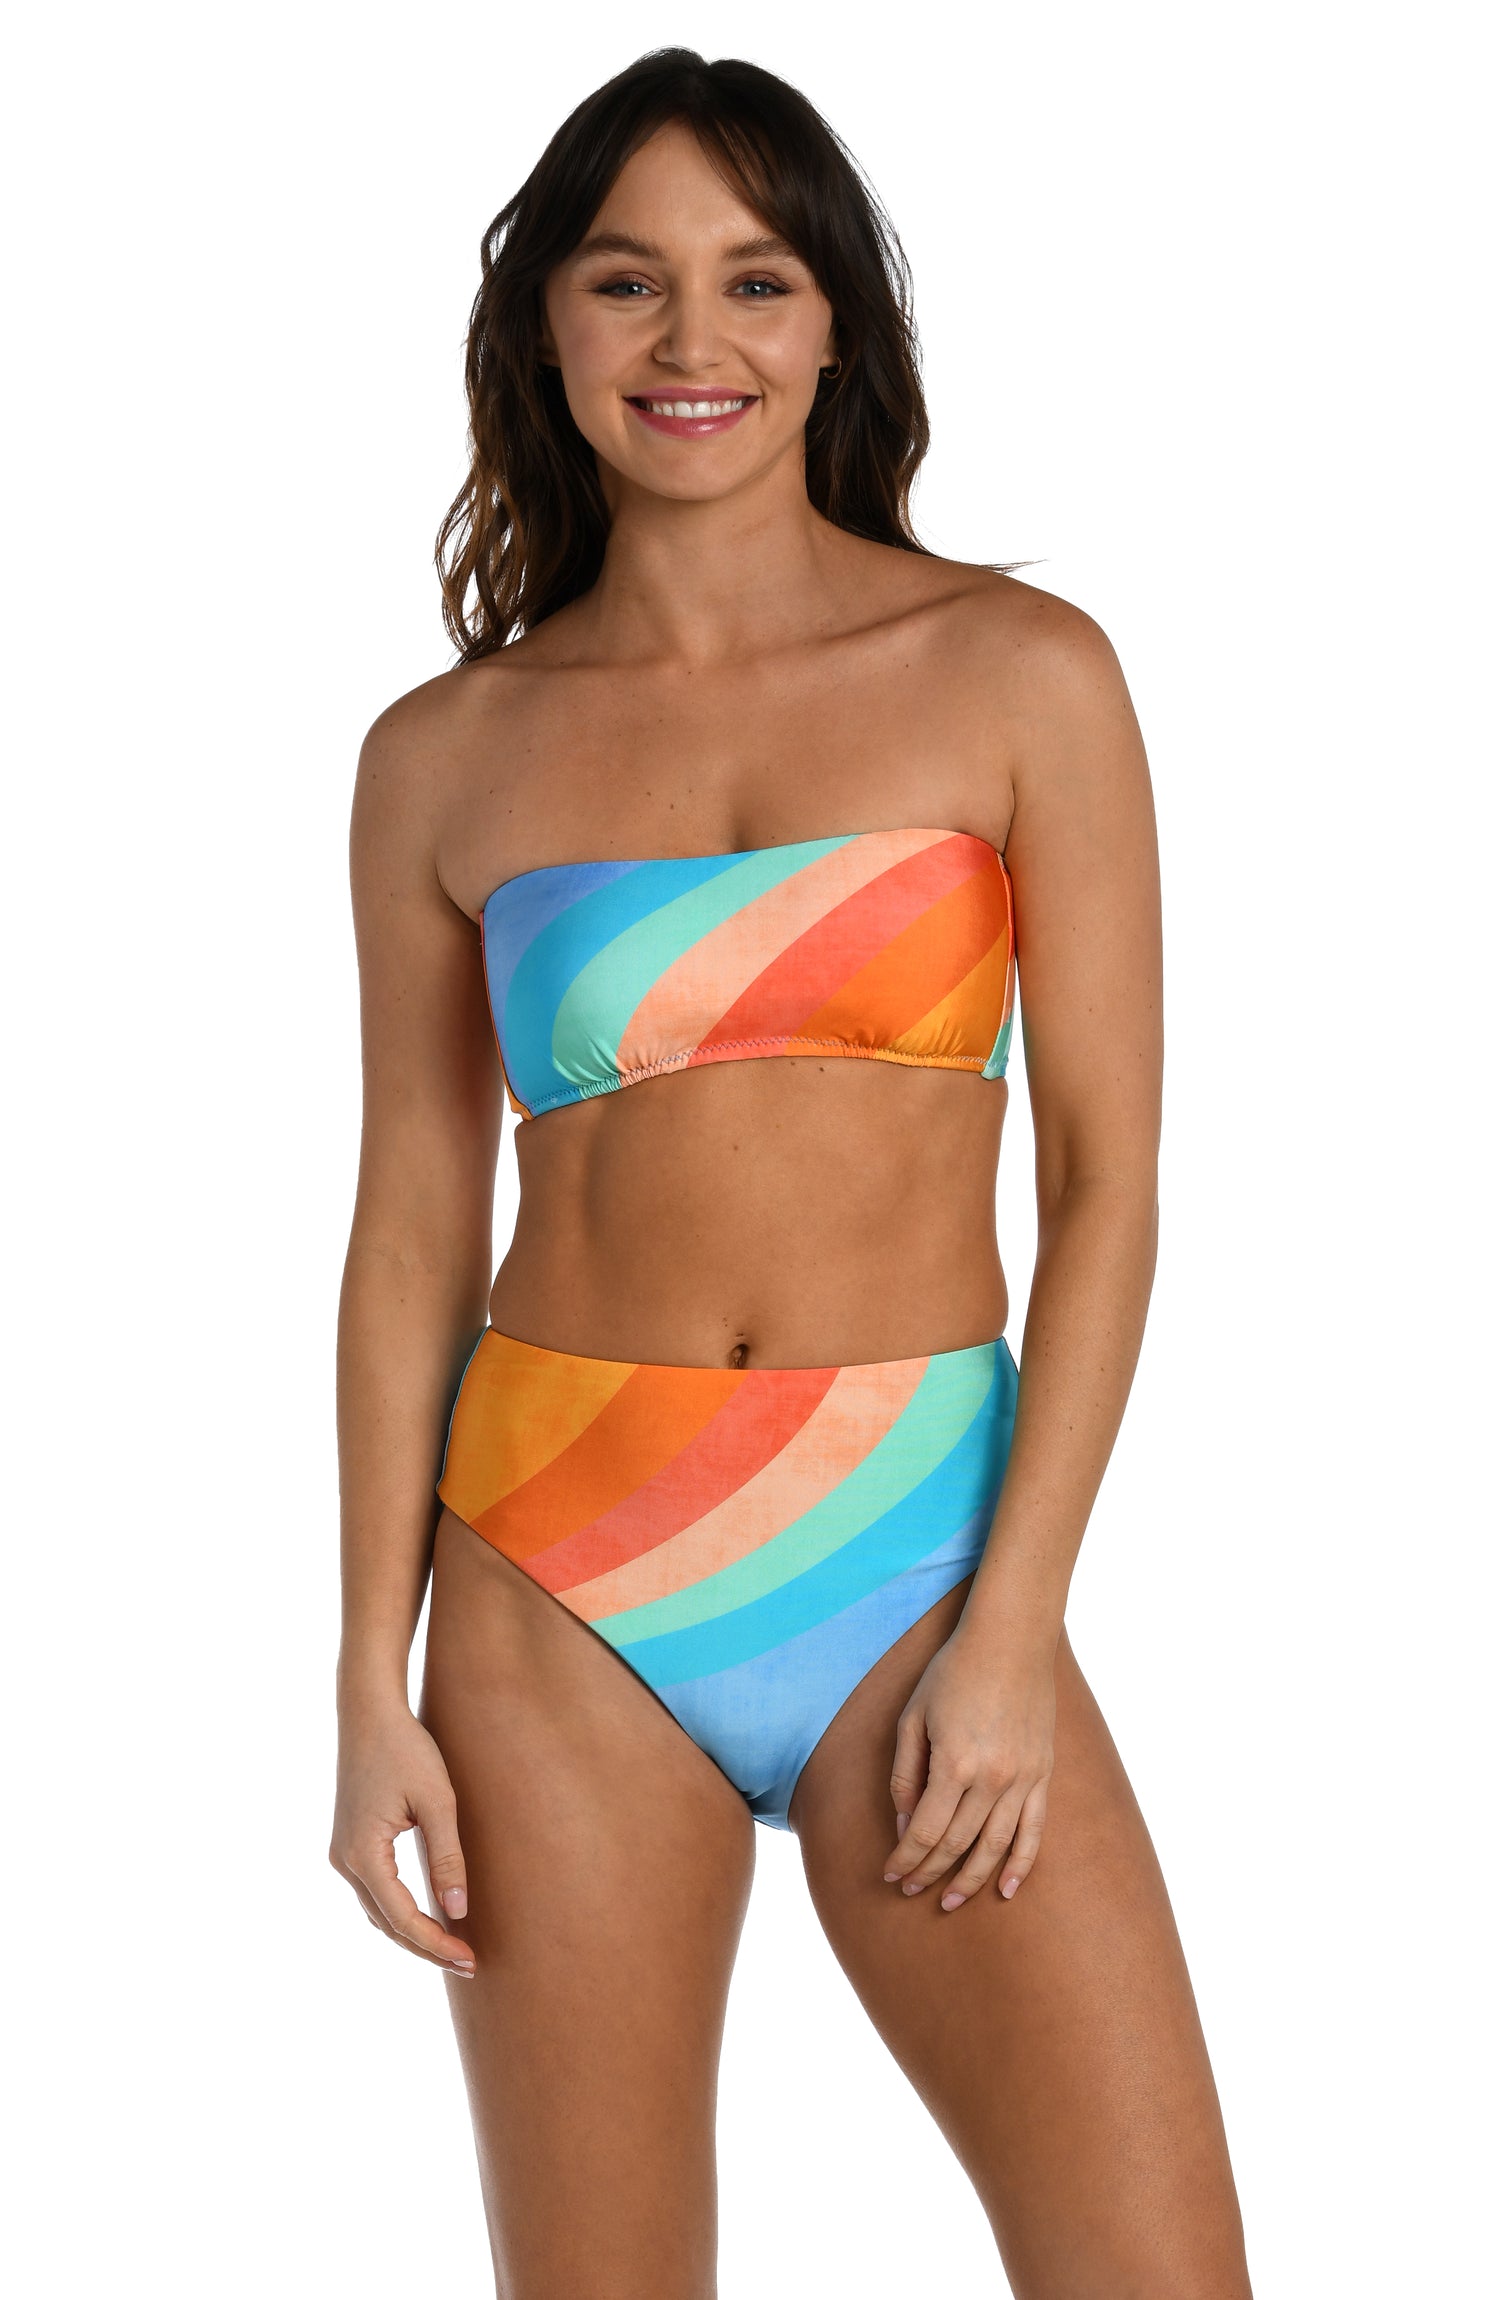 Model is wearing an orange and blue multicolored retro printed bandeau bikini top from our Mod Block collection.